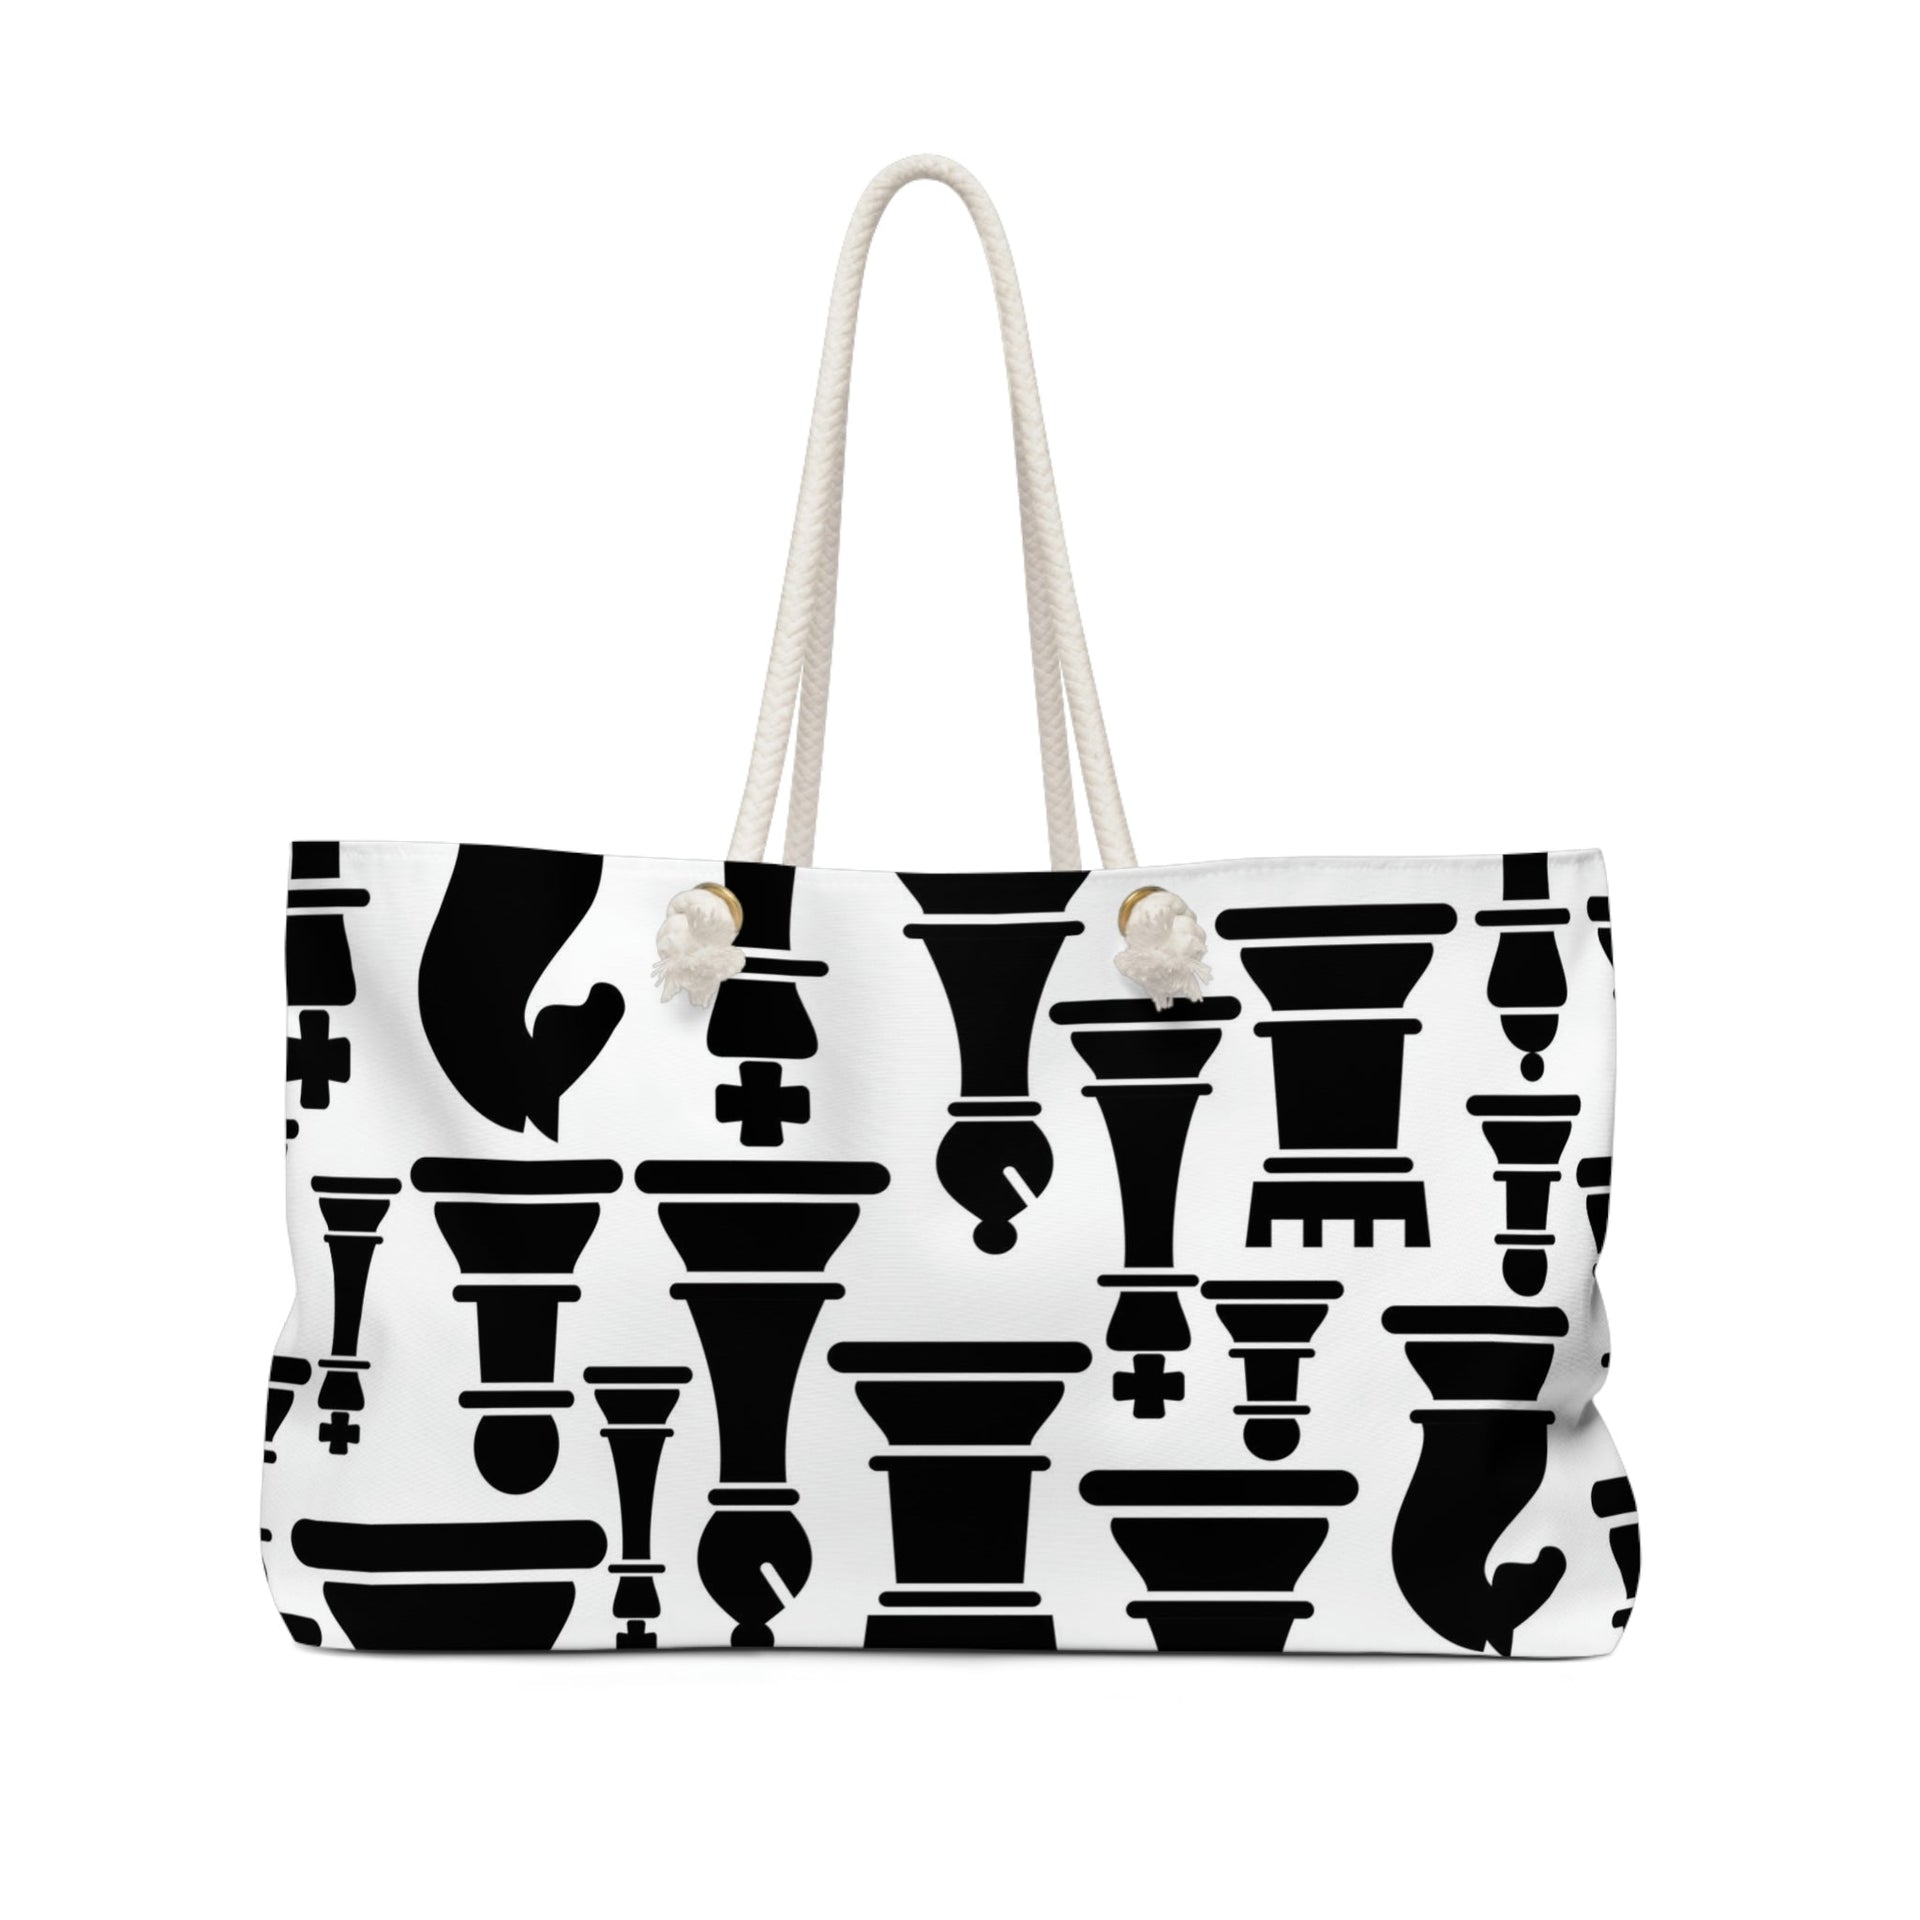 Weekender Tote Bag For Work/school/travel, Black And White Chess Print